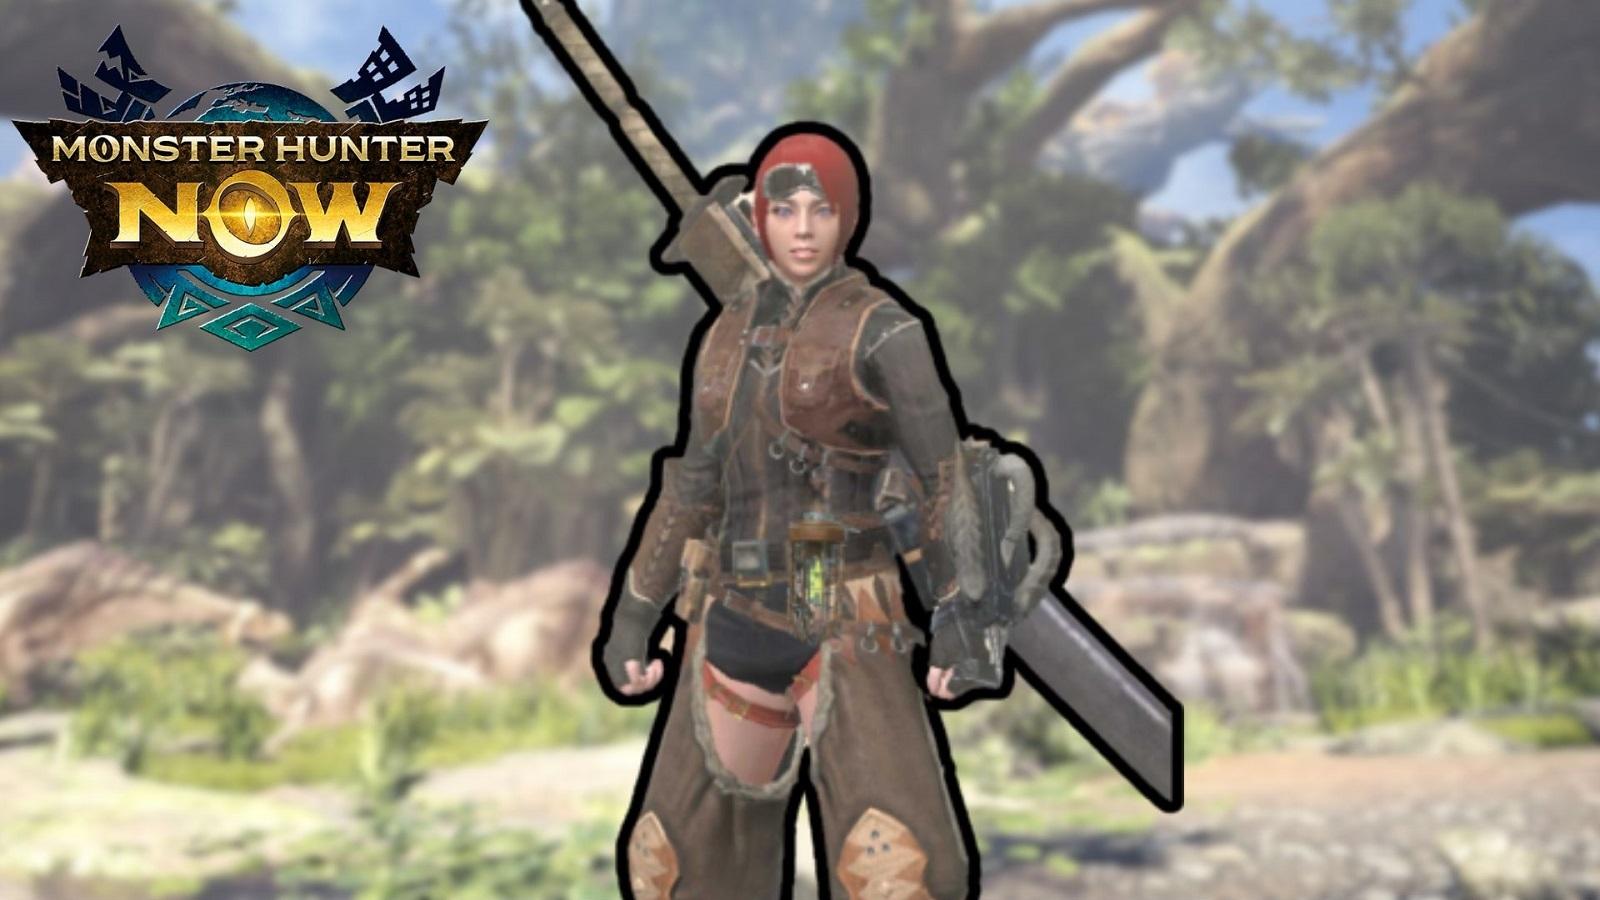 A screenshot from the game Monster Hunter Now